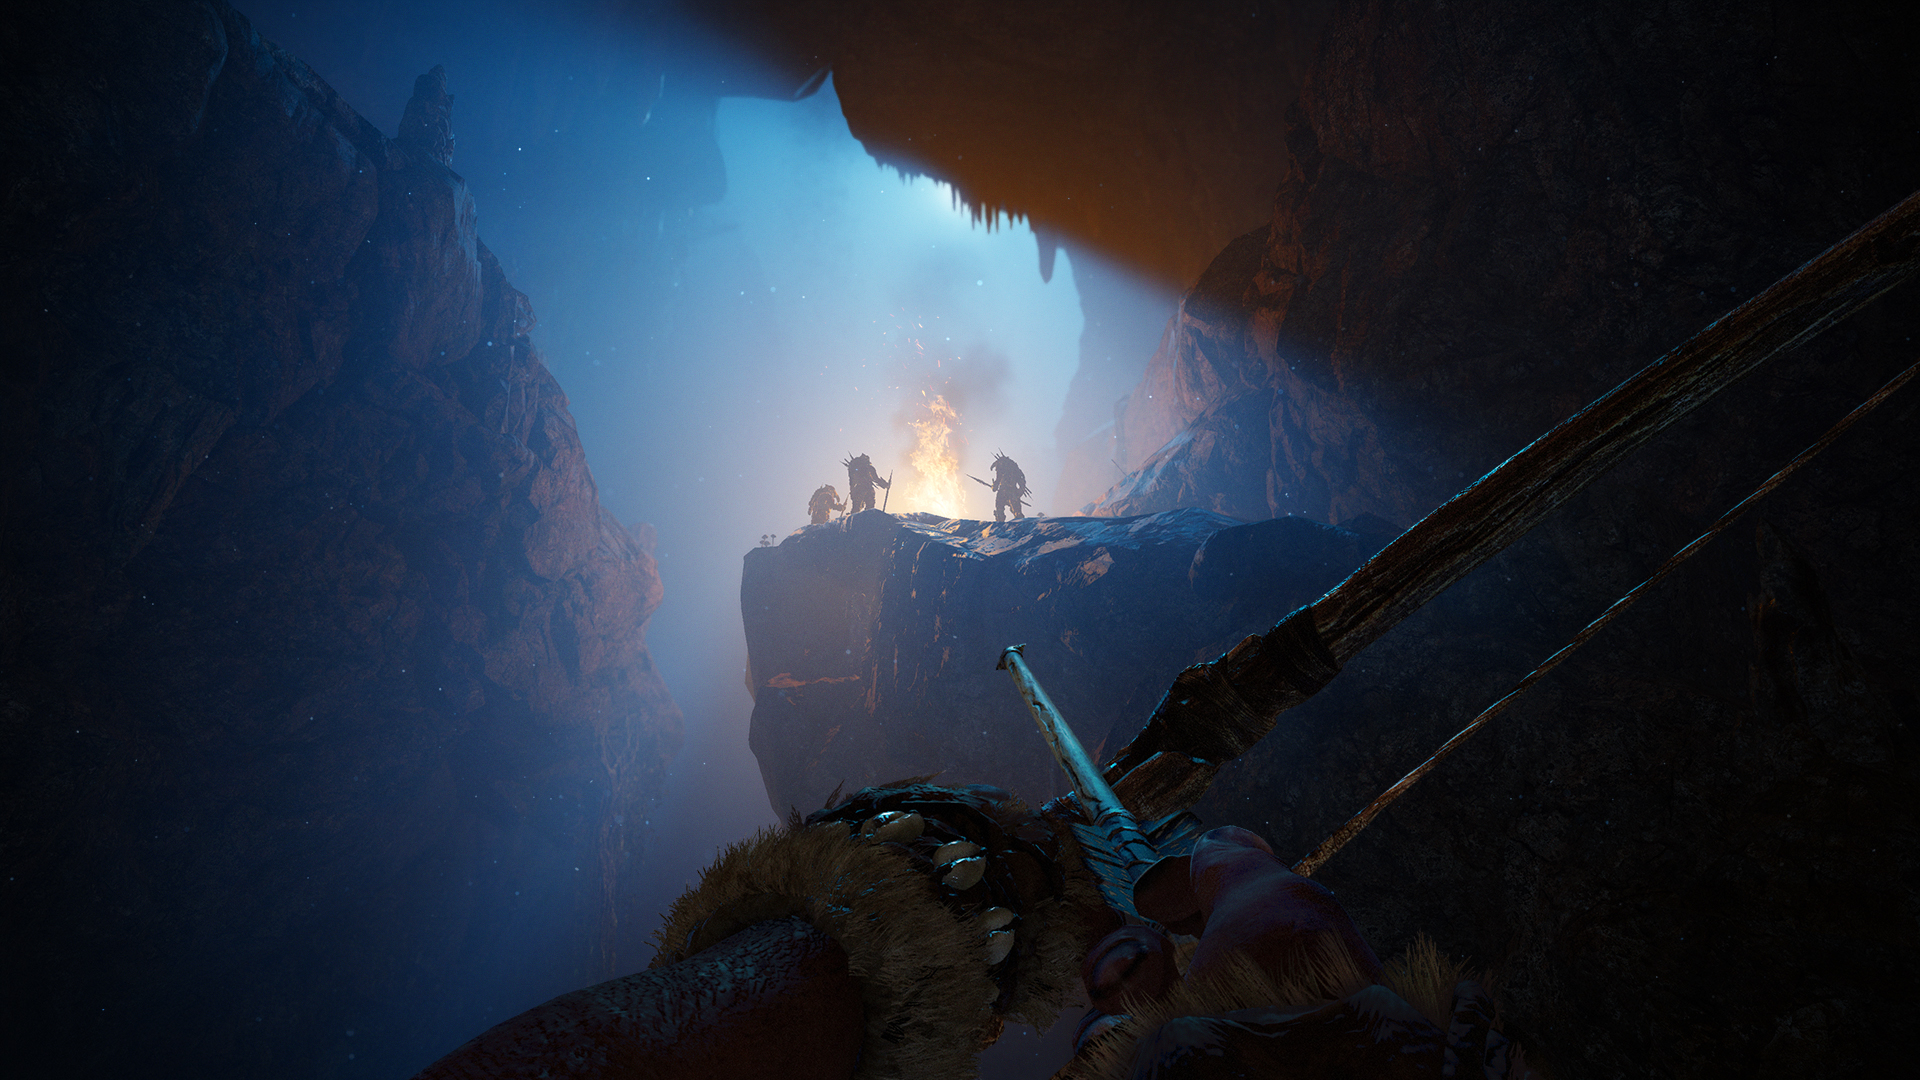 Far Cry Primal Hands On Preview #1